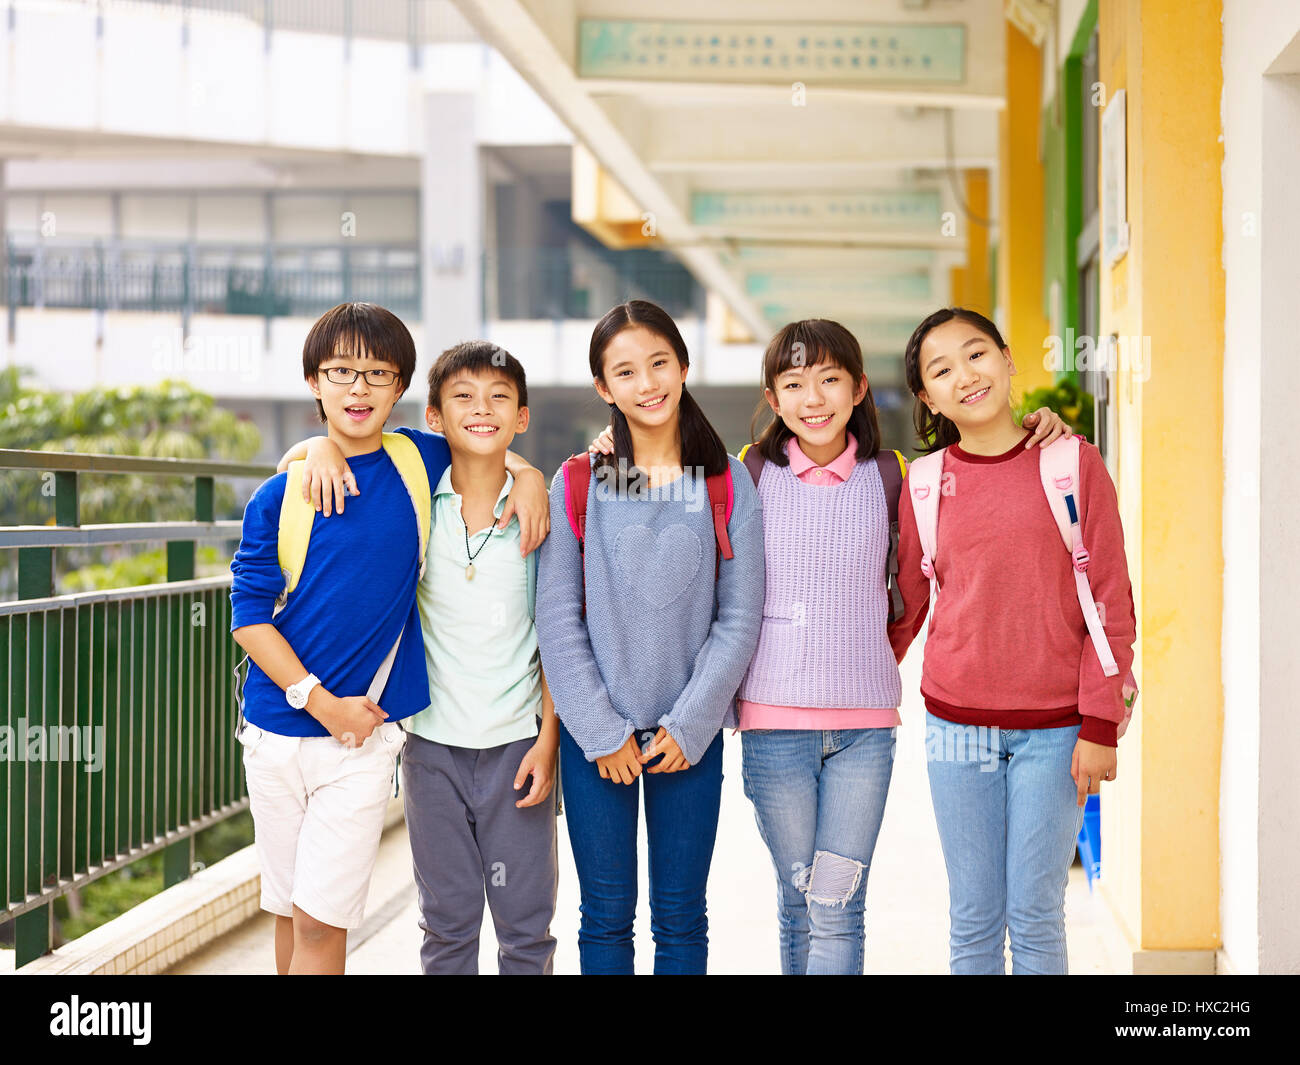 group of happy and smiling elementary schoolboys and schoolgirls standing in hallway of classroom building on campus. Stock Photo